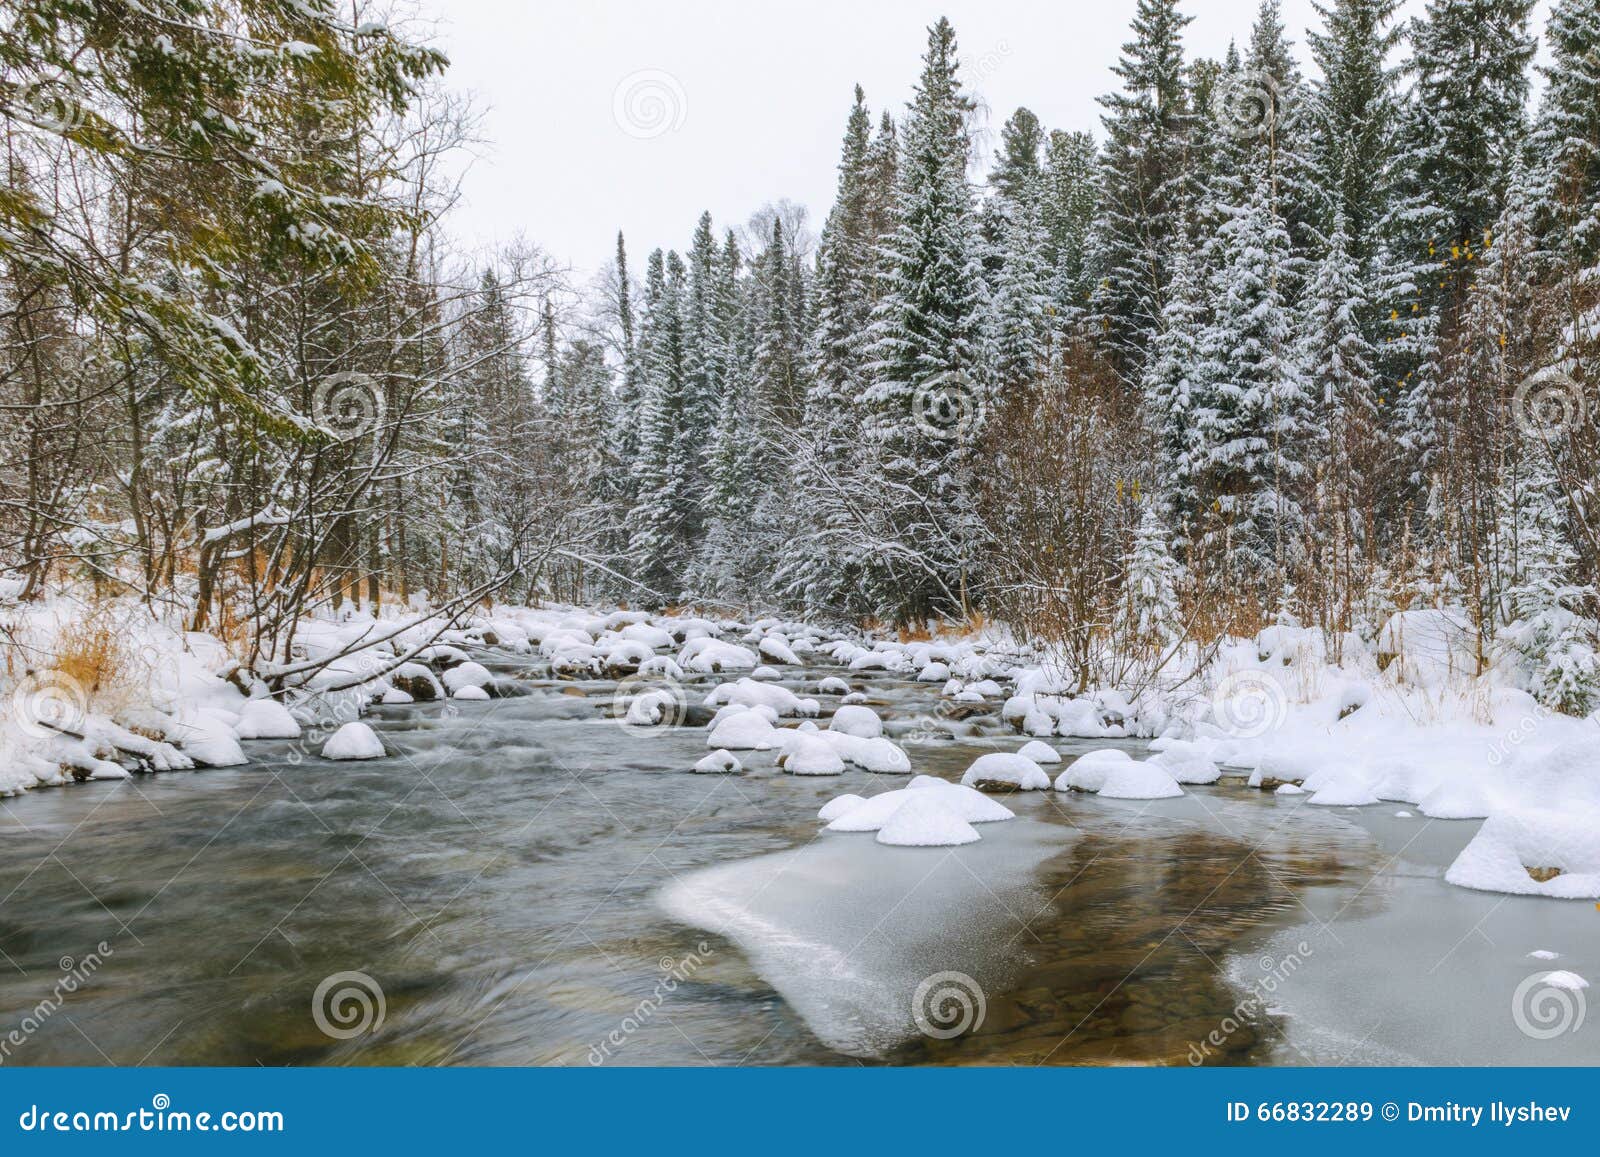 River With Snowy Stones In Forest Russian Nature Stock Image Image